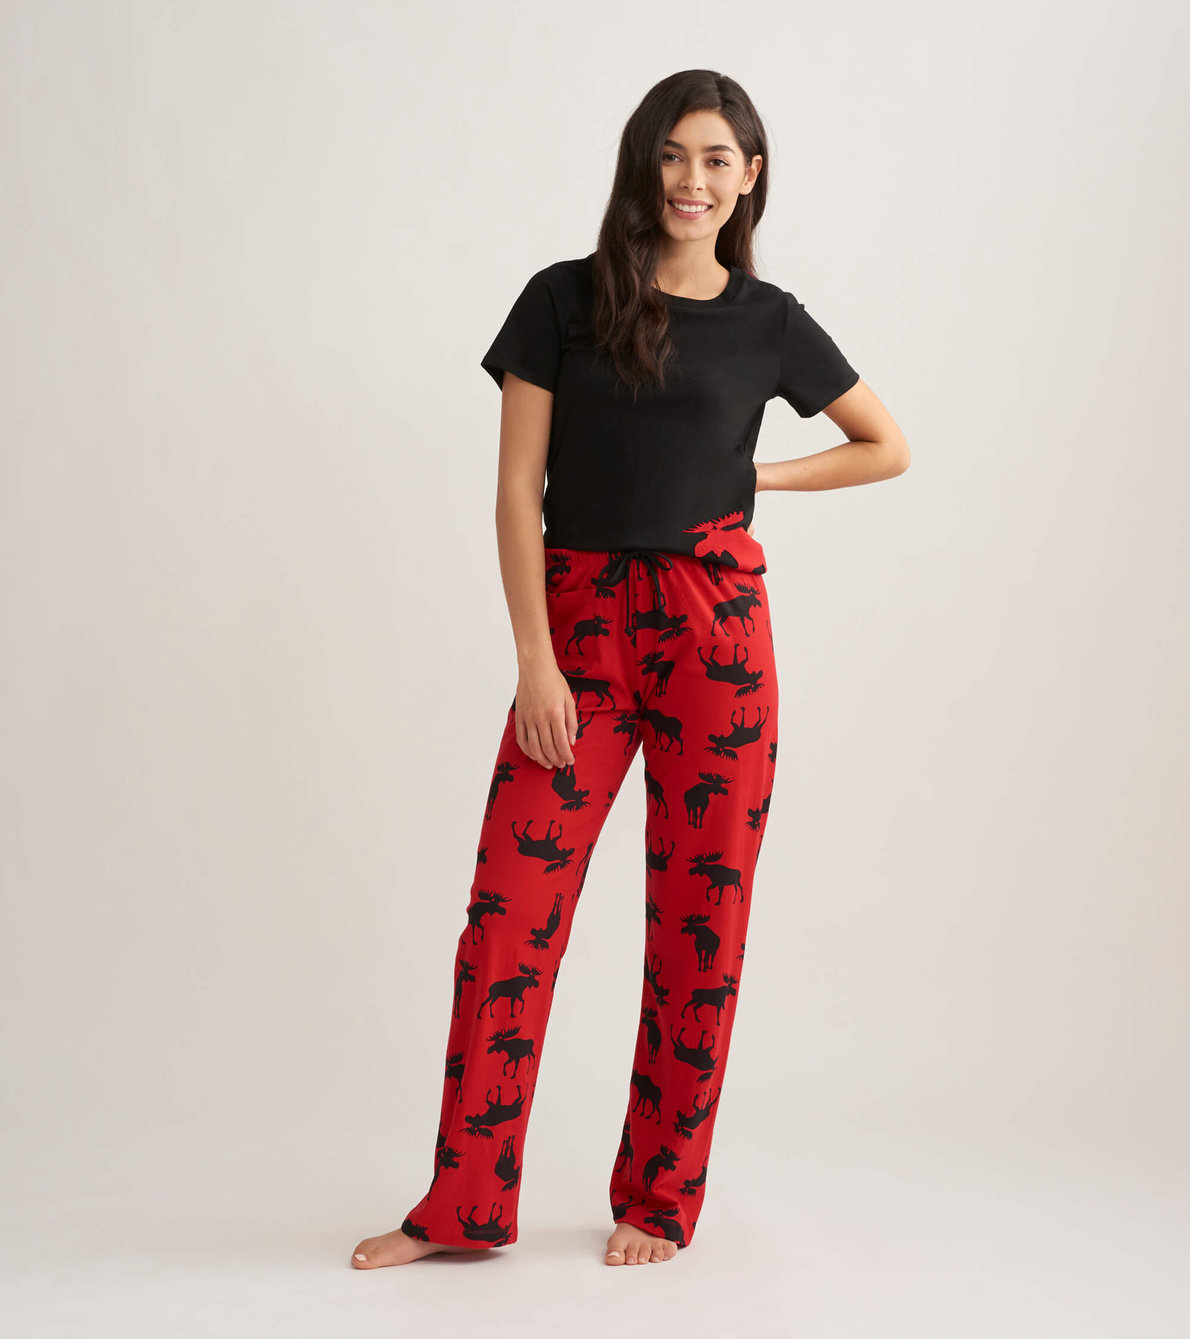 View larger image of Moose on Red Women's Tee and Pants Pajama Separates